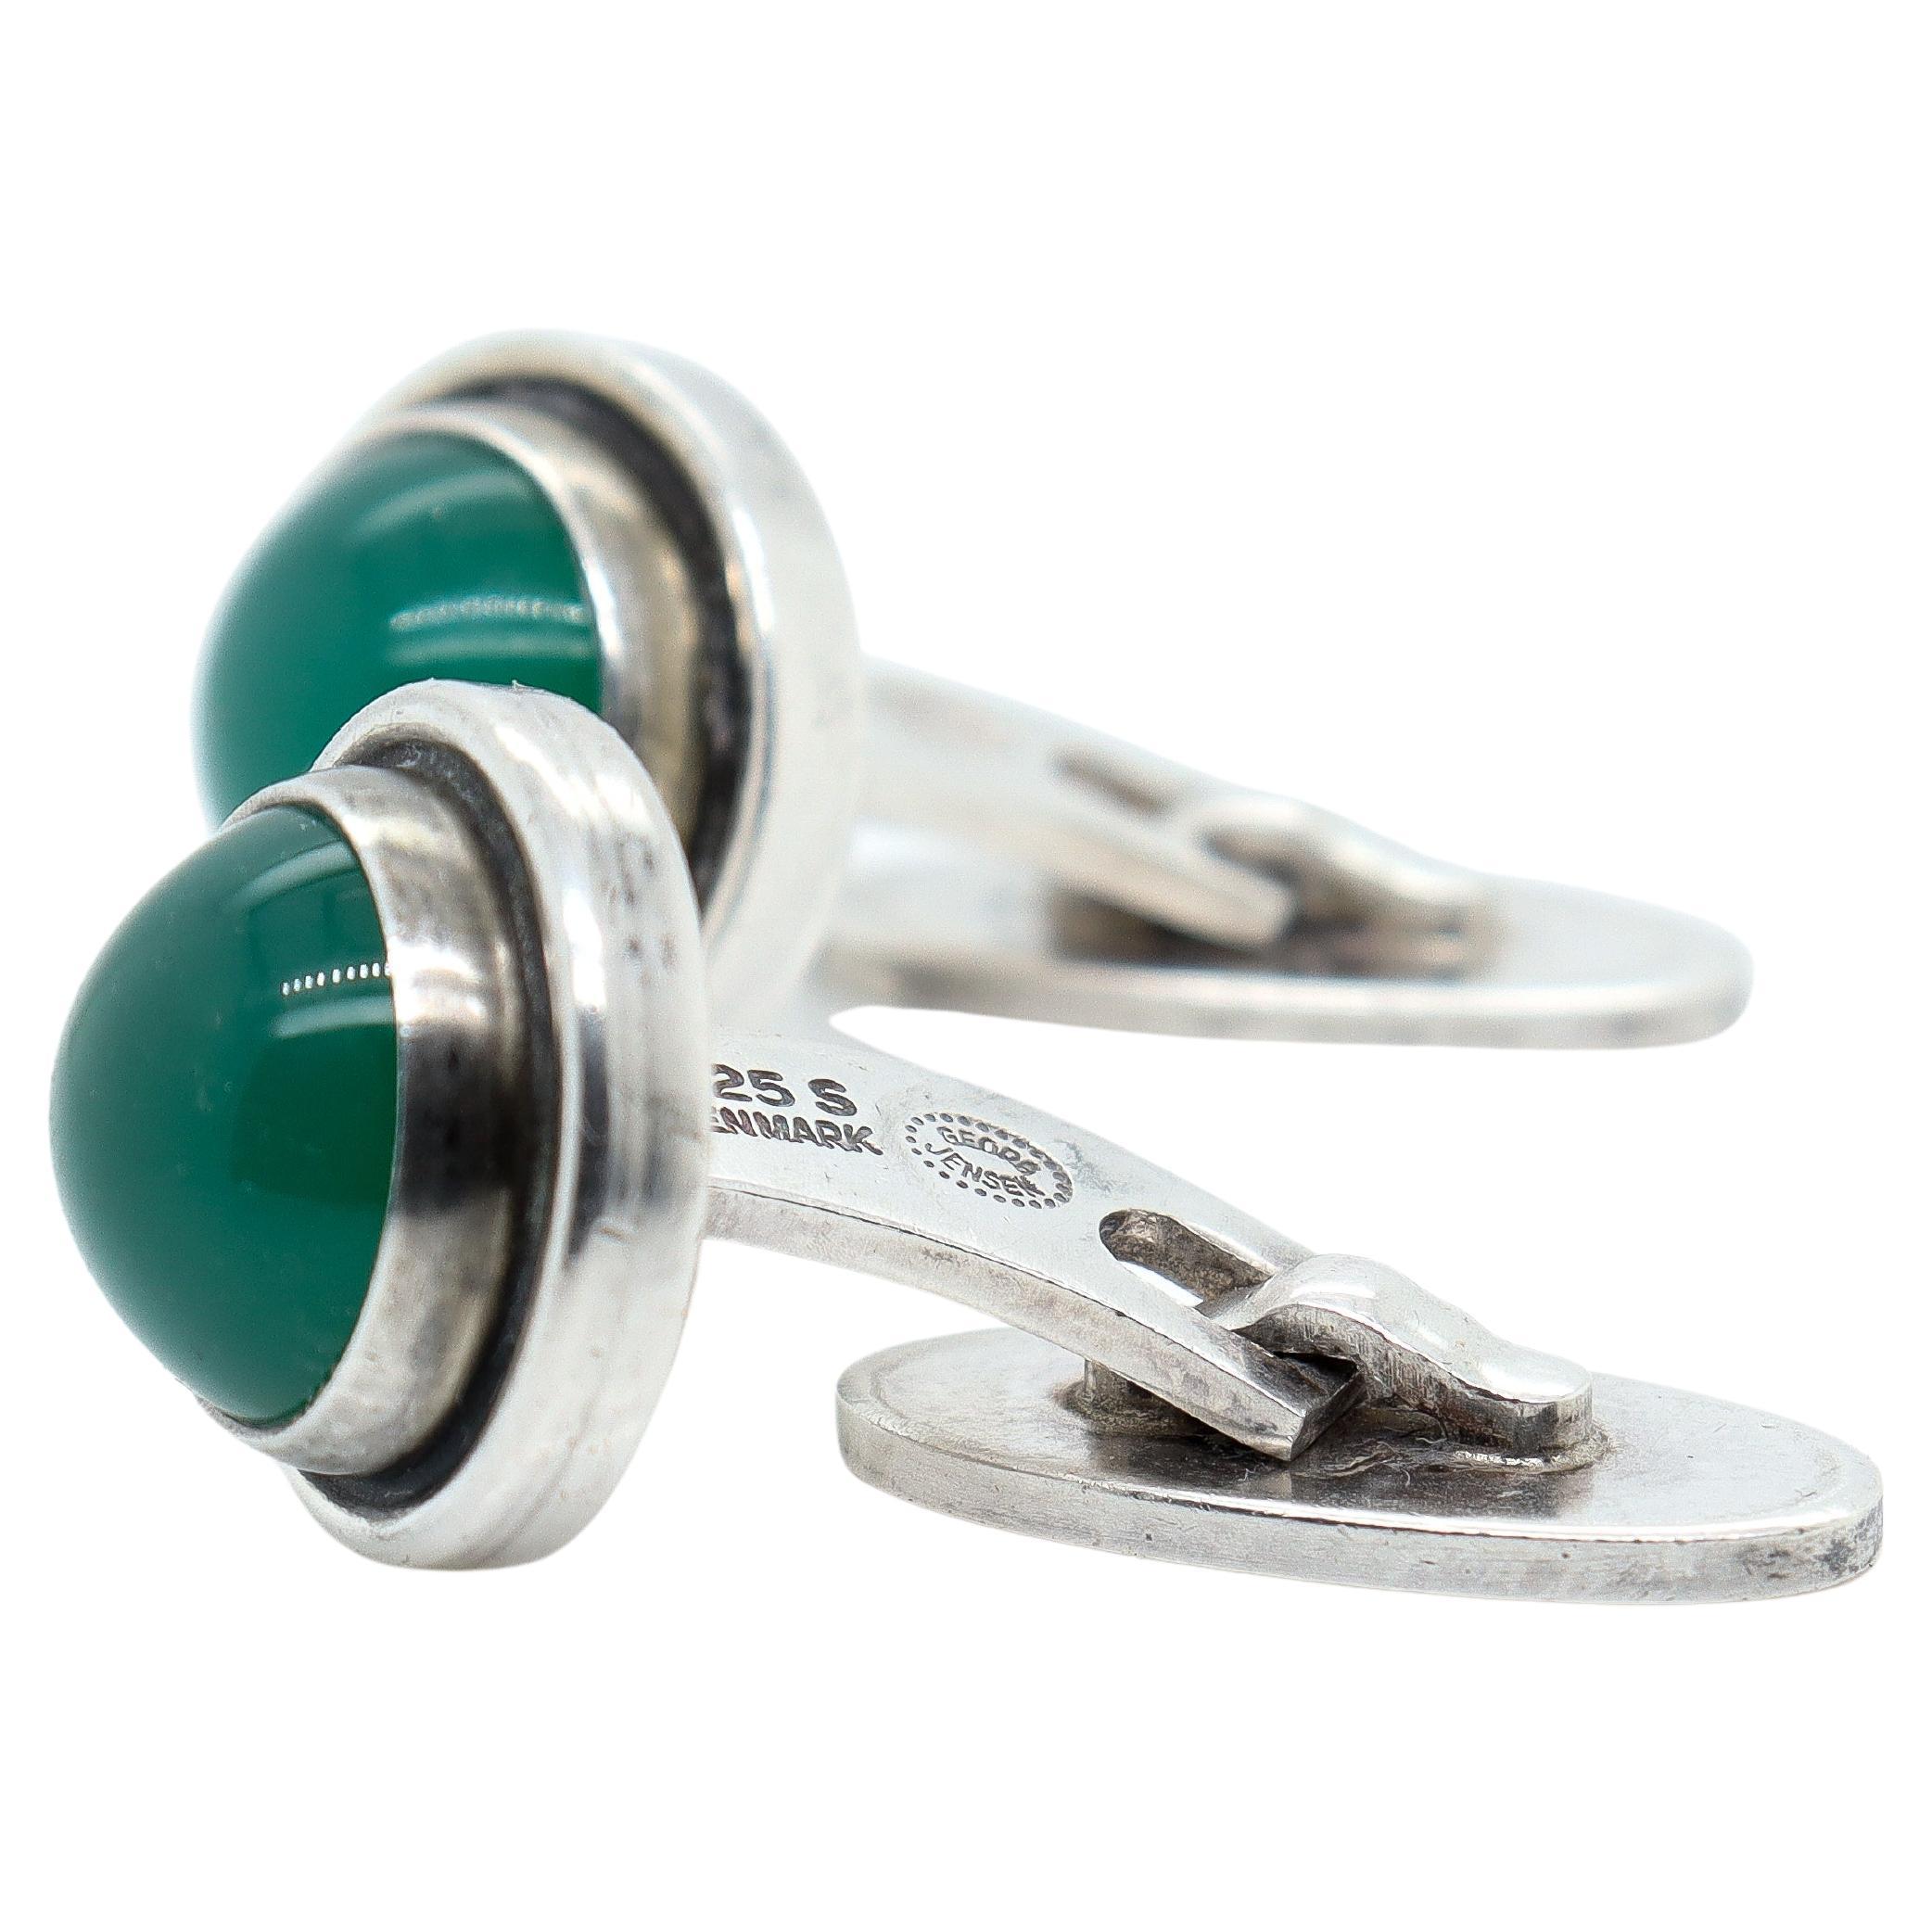 A pair of fine vintage Georg Jensen cufflinks.

In sterling silver with chrysoprase cabochons

Designed by Harald Nielsen for Georg Jensen

Pattern no. 44D.

Marked to one side of the post with 925 S / Denmark / post-1945 Georg Jensen's maker's